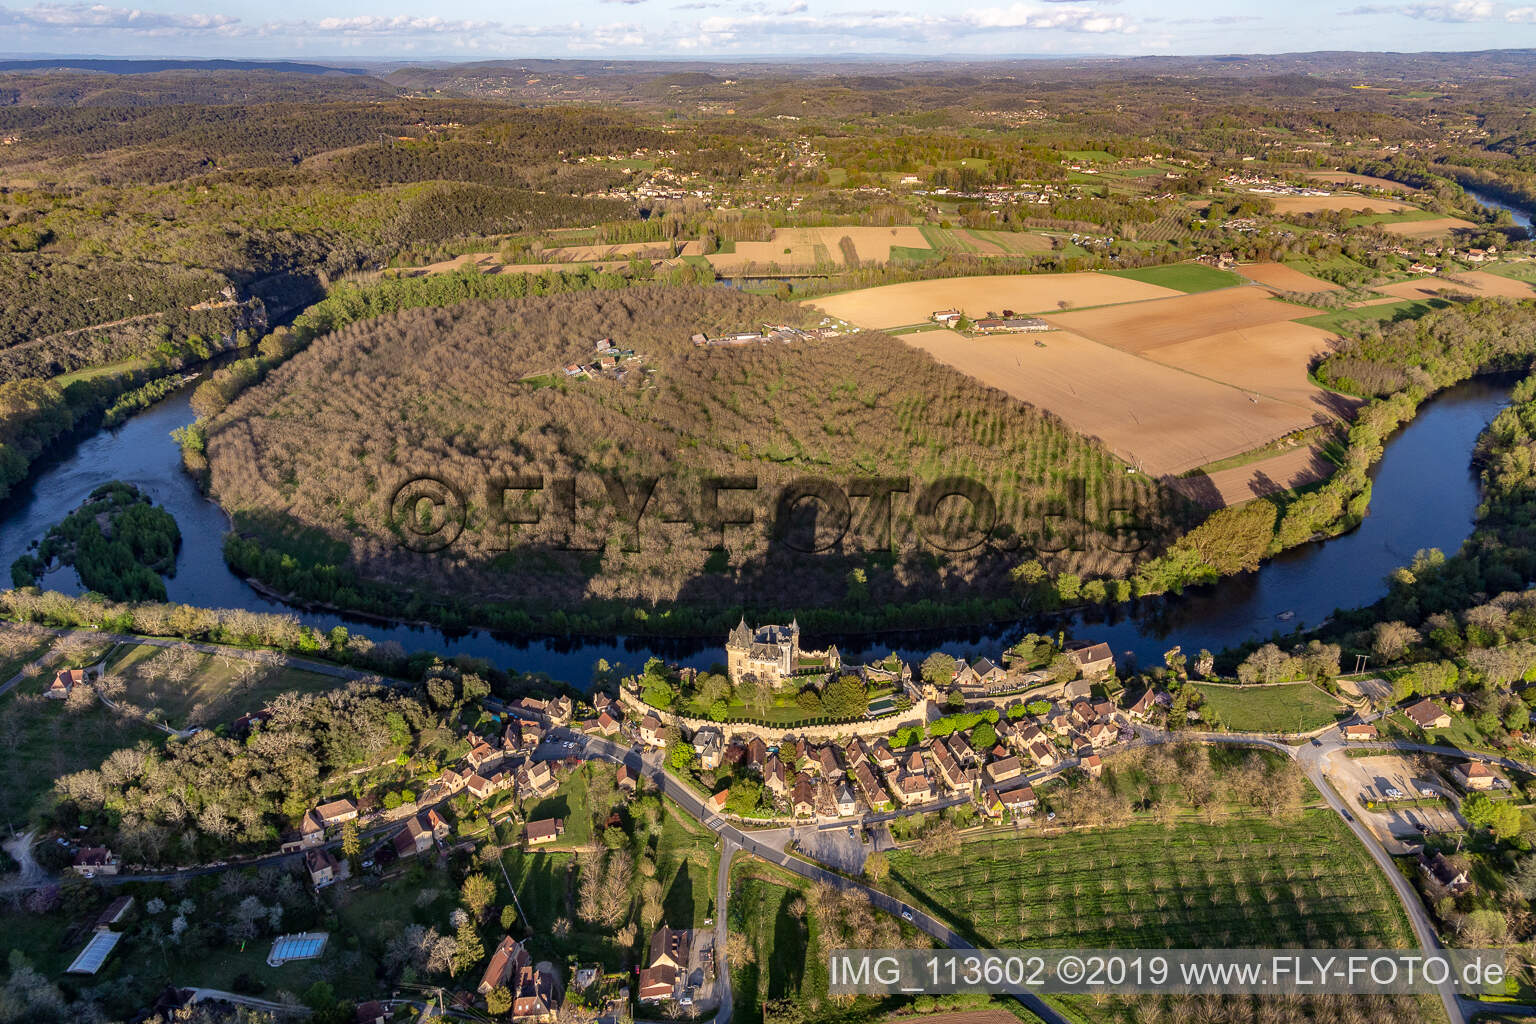 Oblique view of Castle of Montfort above the Dordogne in Vitrac in Nouvelle-Aquitaine, France